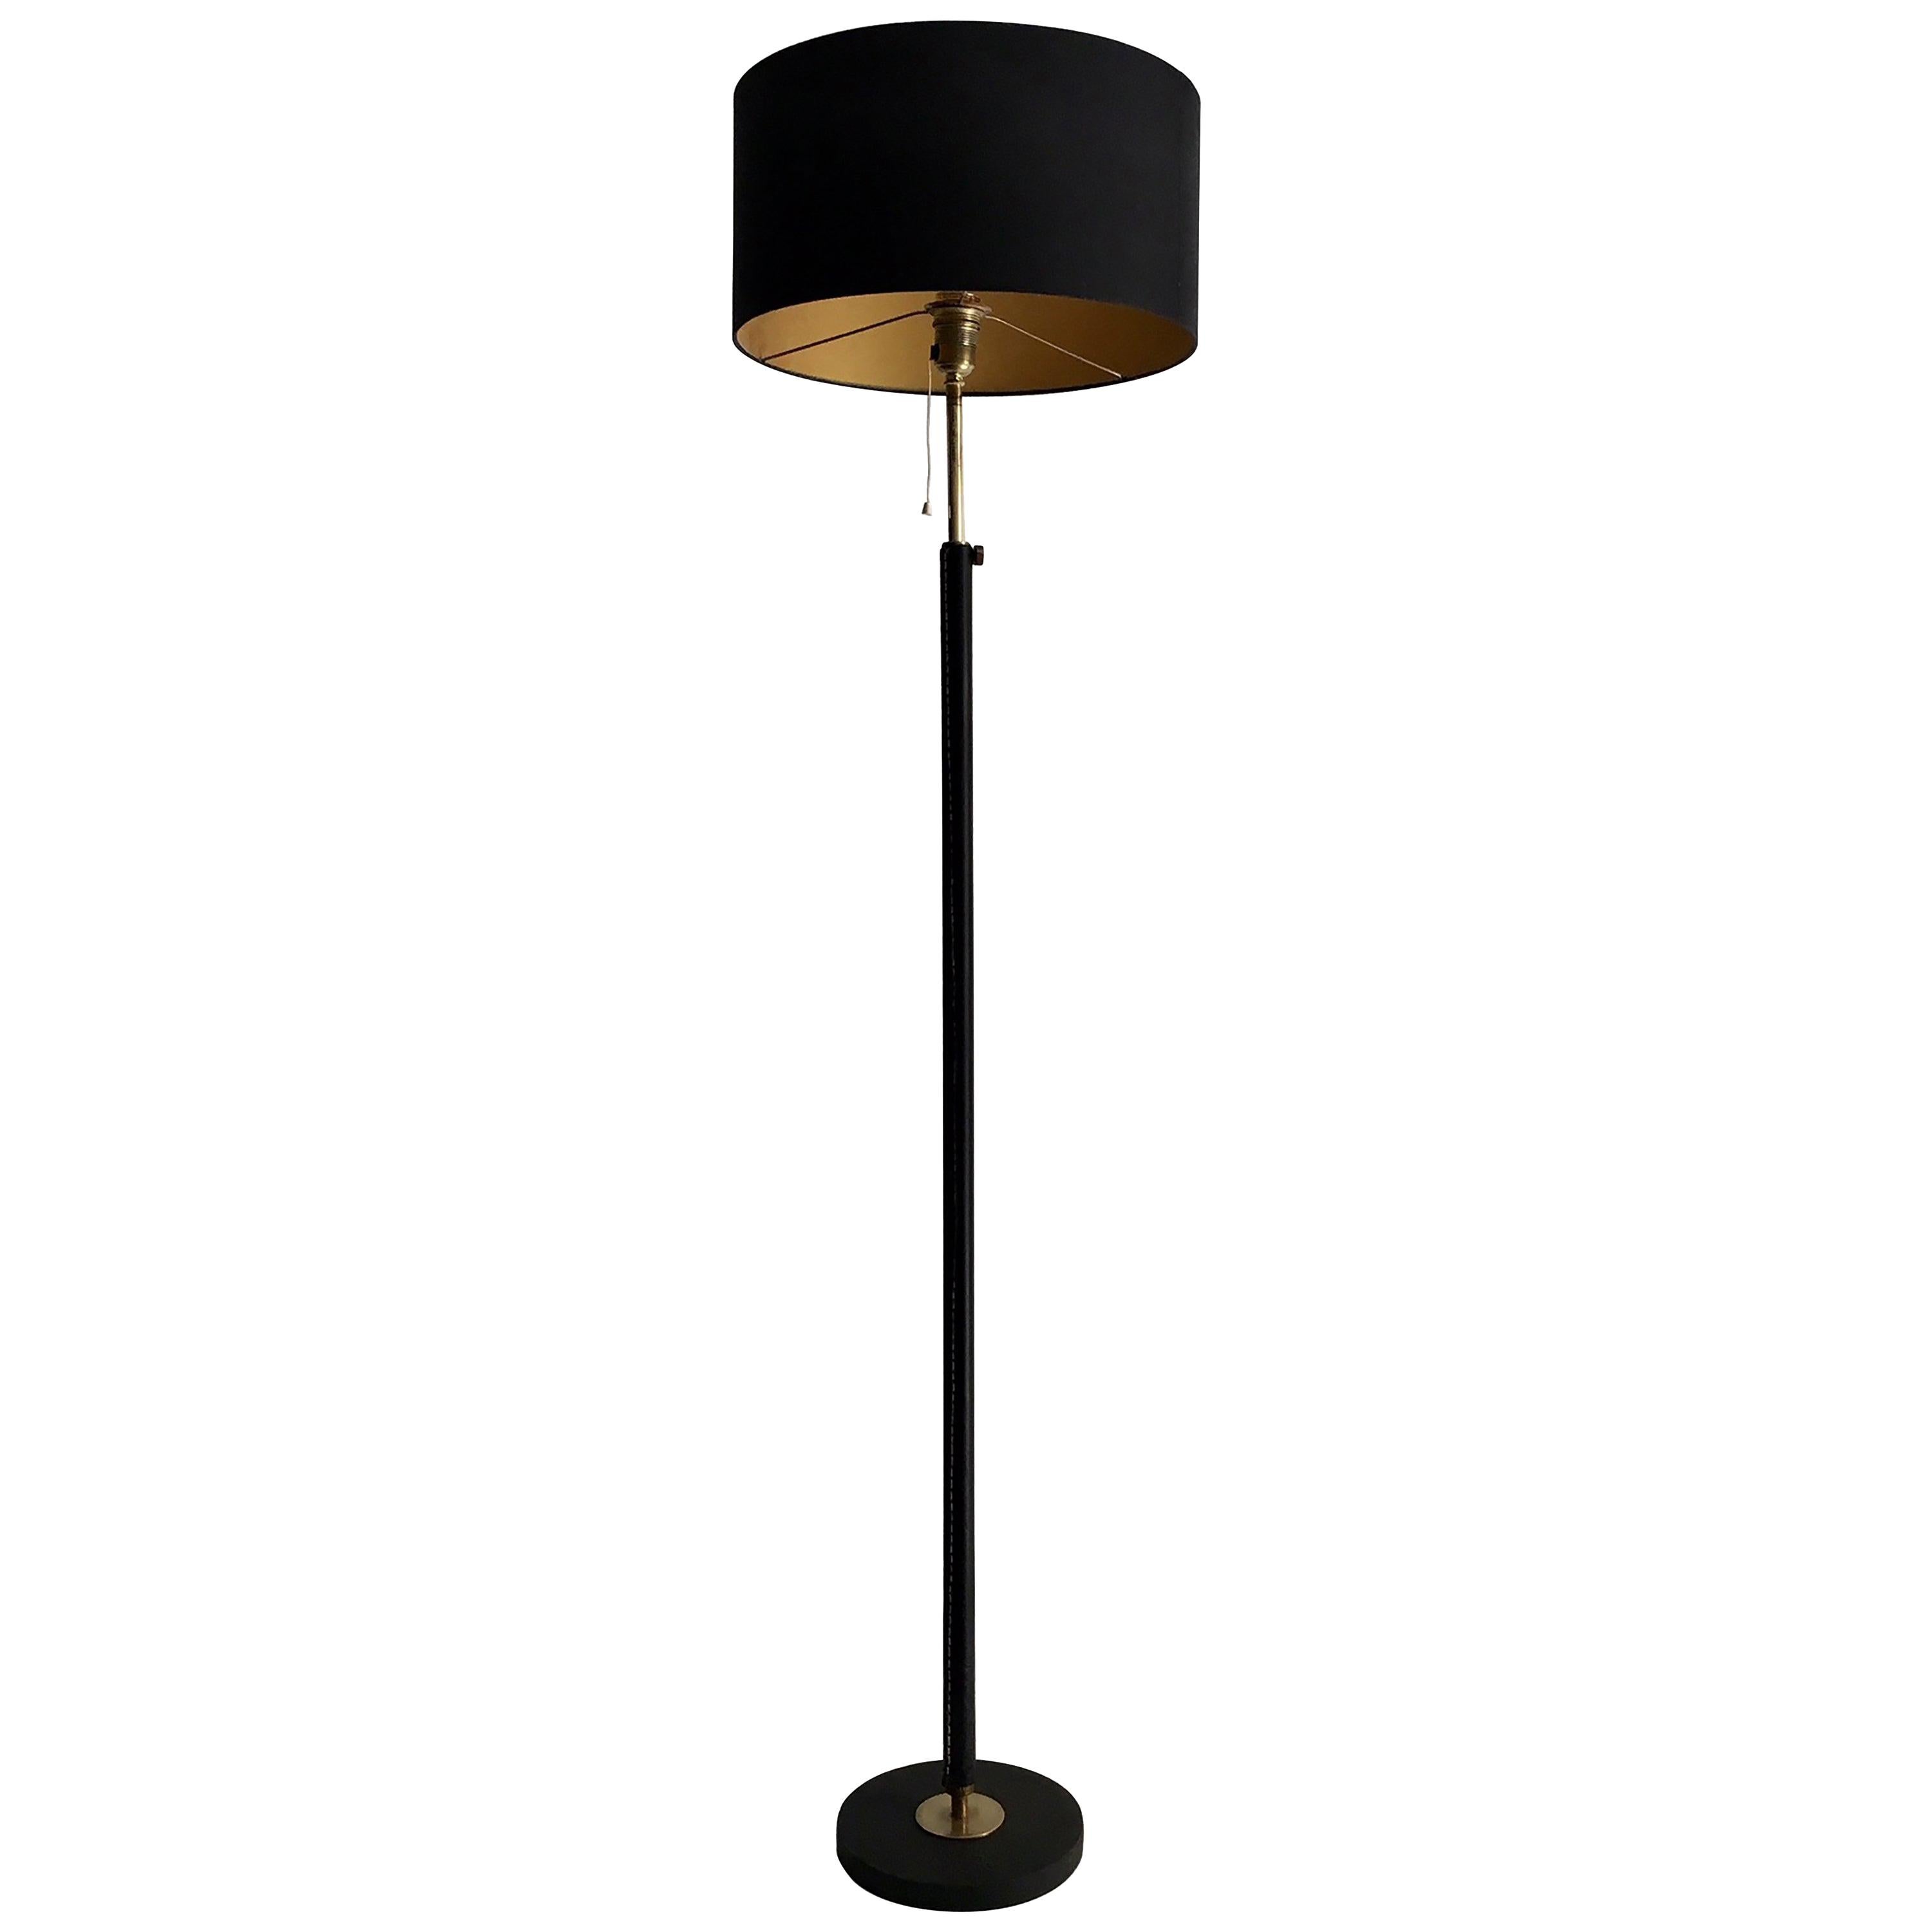 Midcentury French Leather Floor Lamp, Jacques Adnet Style